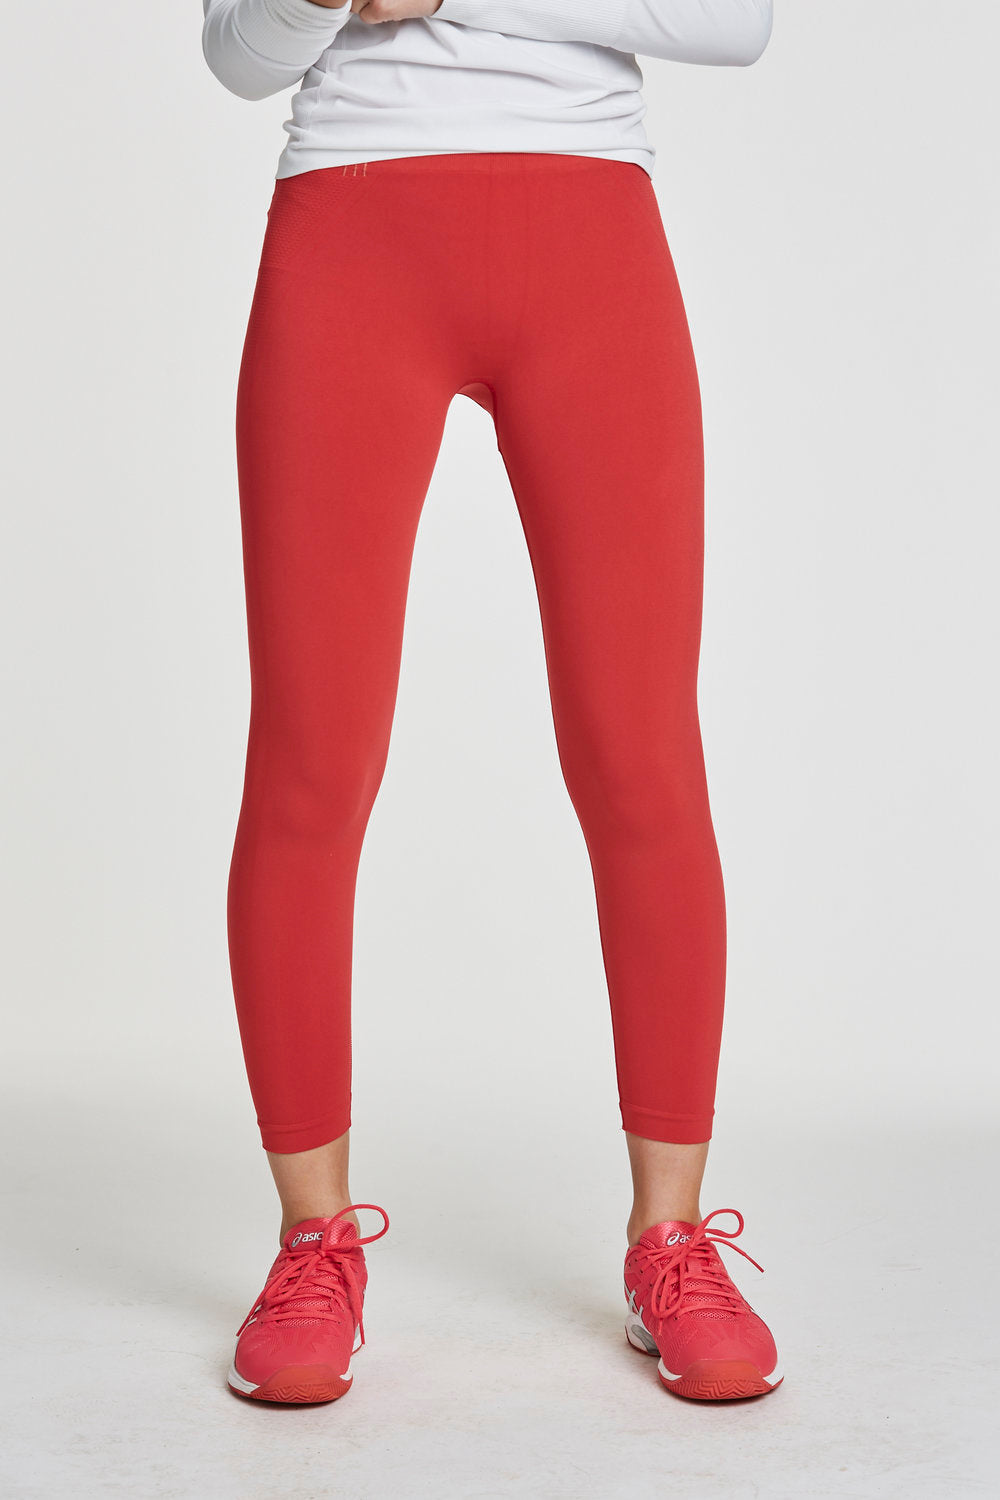 A-30 Tights Red